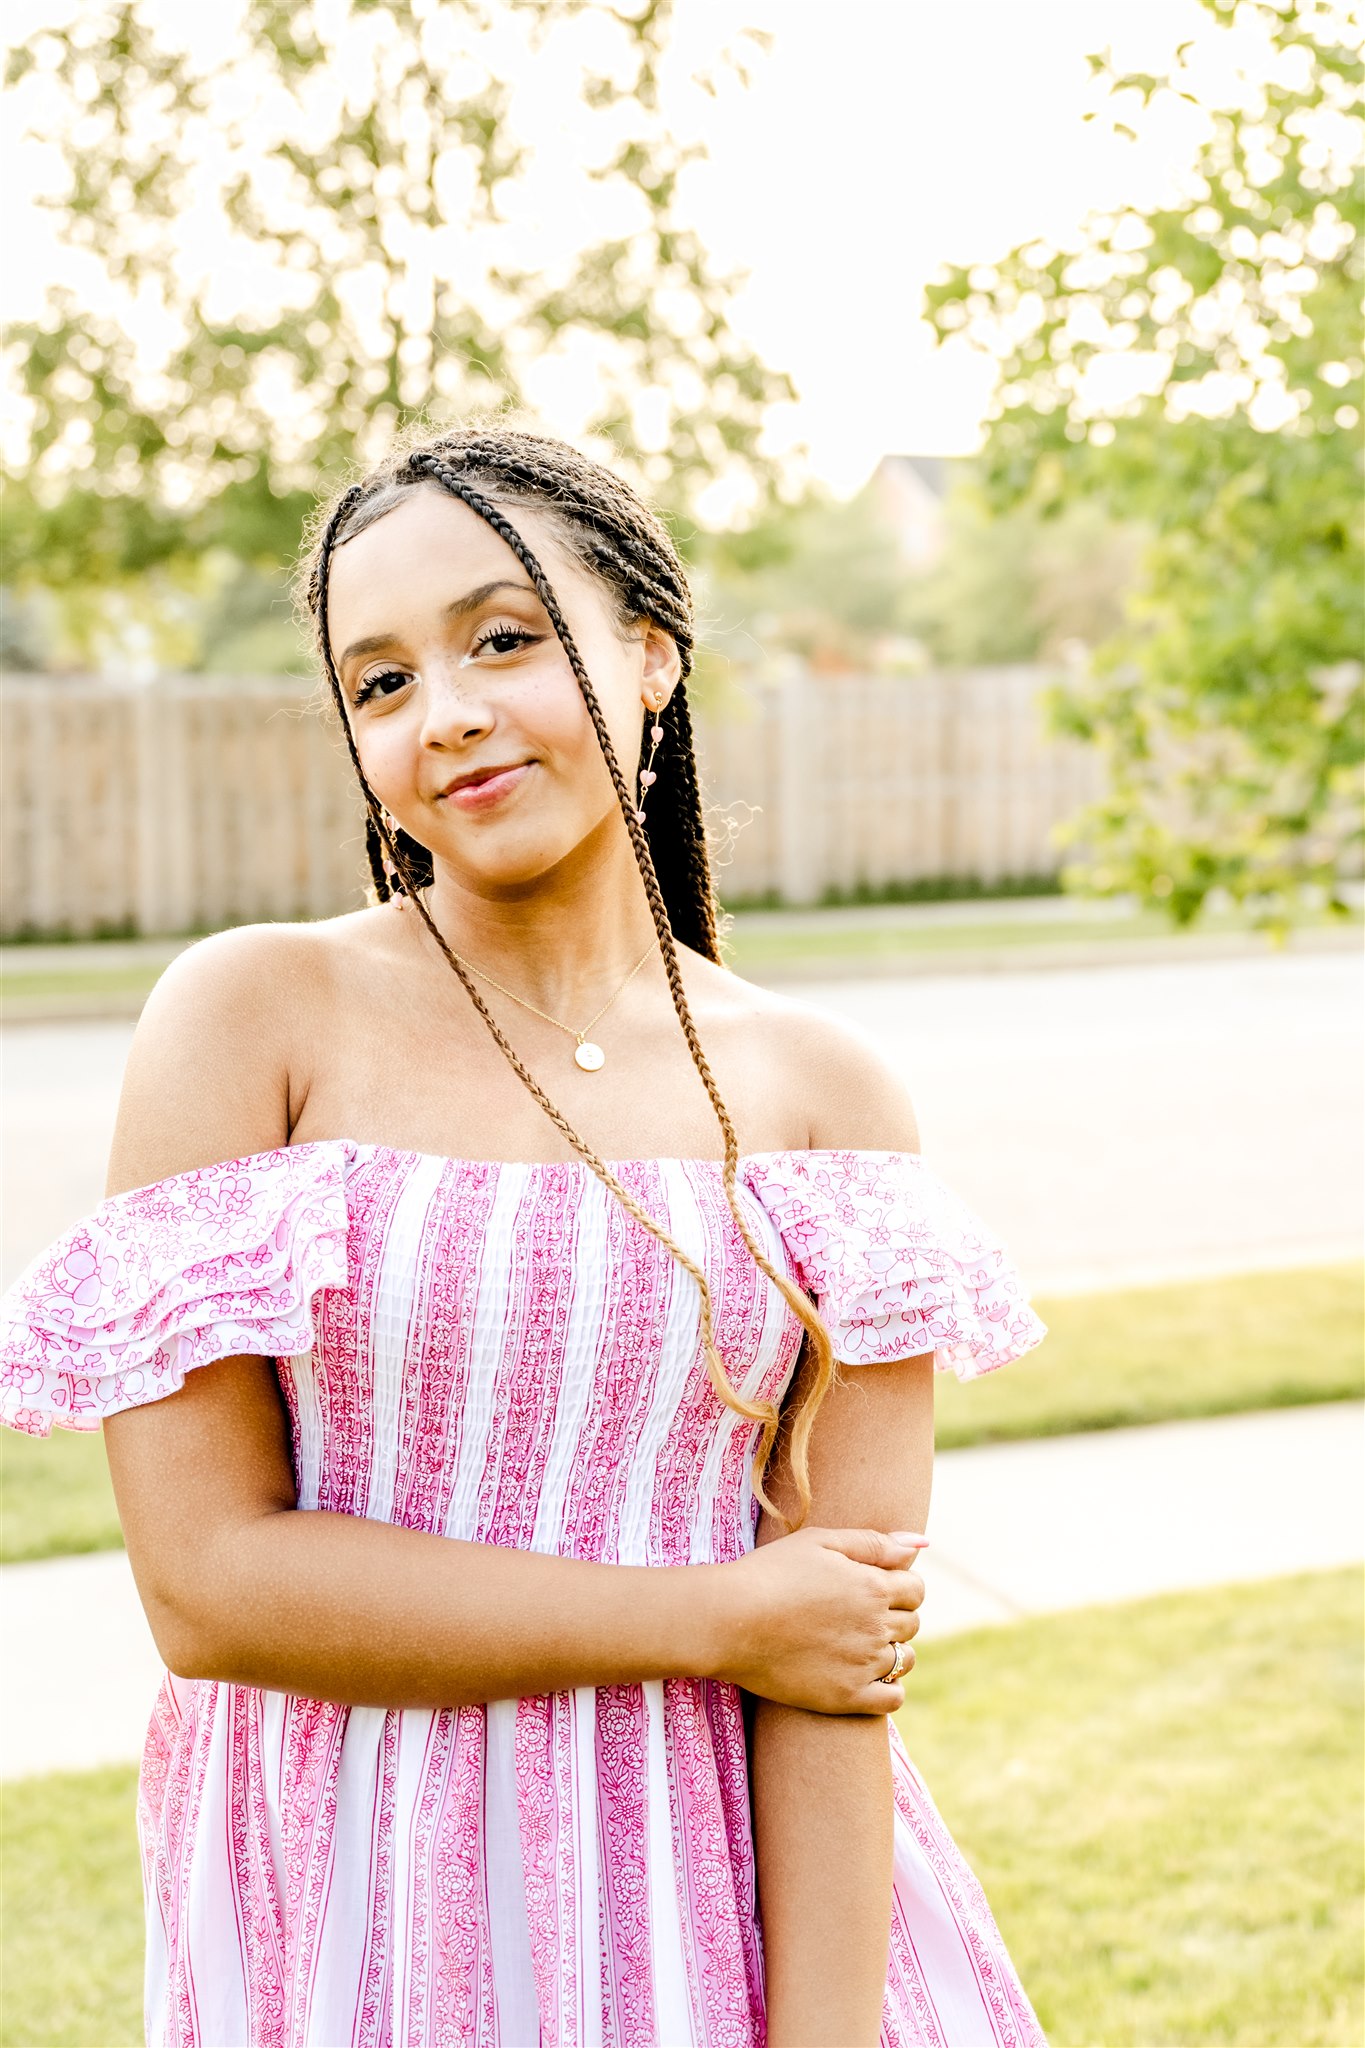 A high school senior stands in her yard in a pink striped dress holding one arm